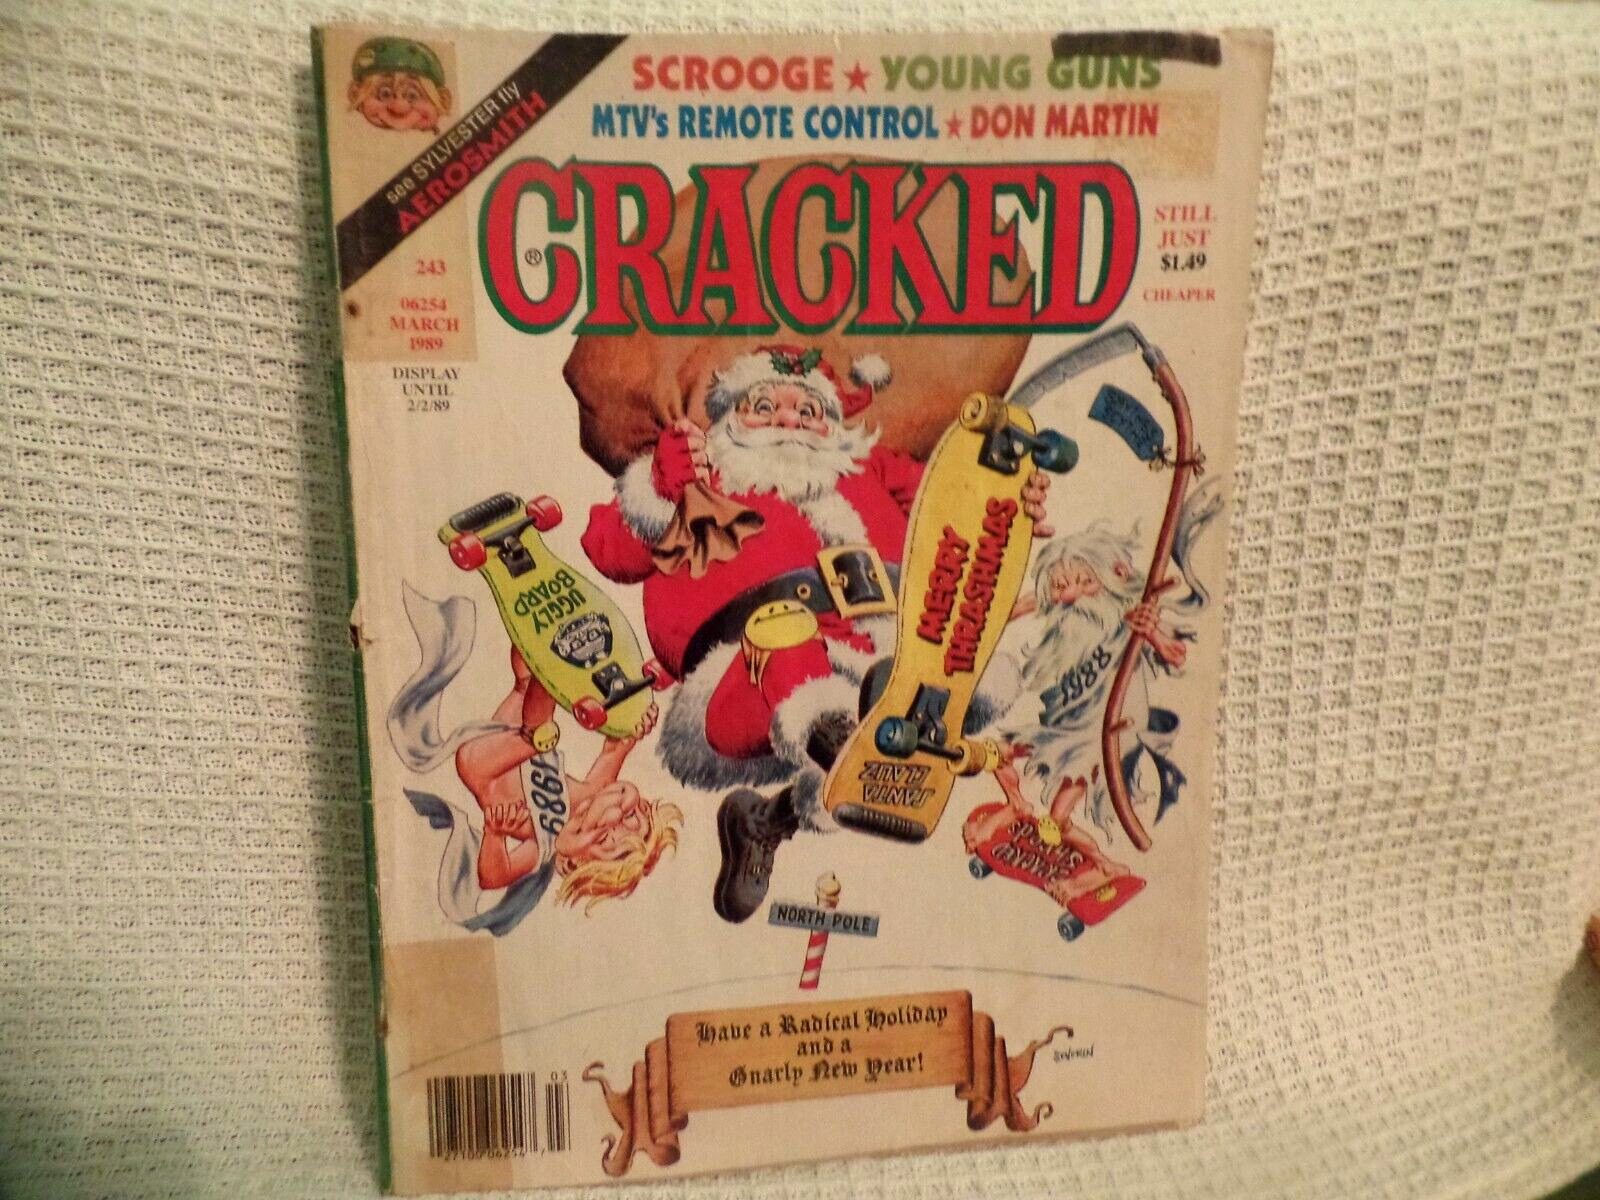 CRACKED Magazine, #243 March 1989-Shows wear & taped-AS IS-FAIR-L@@K